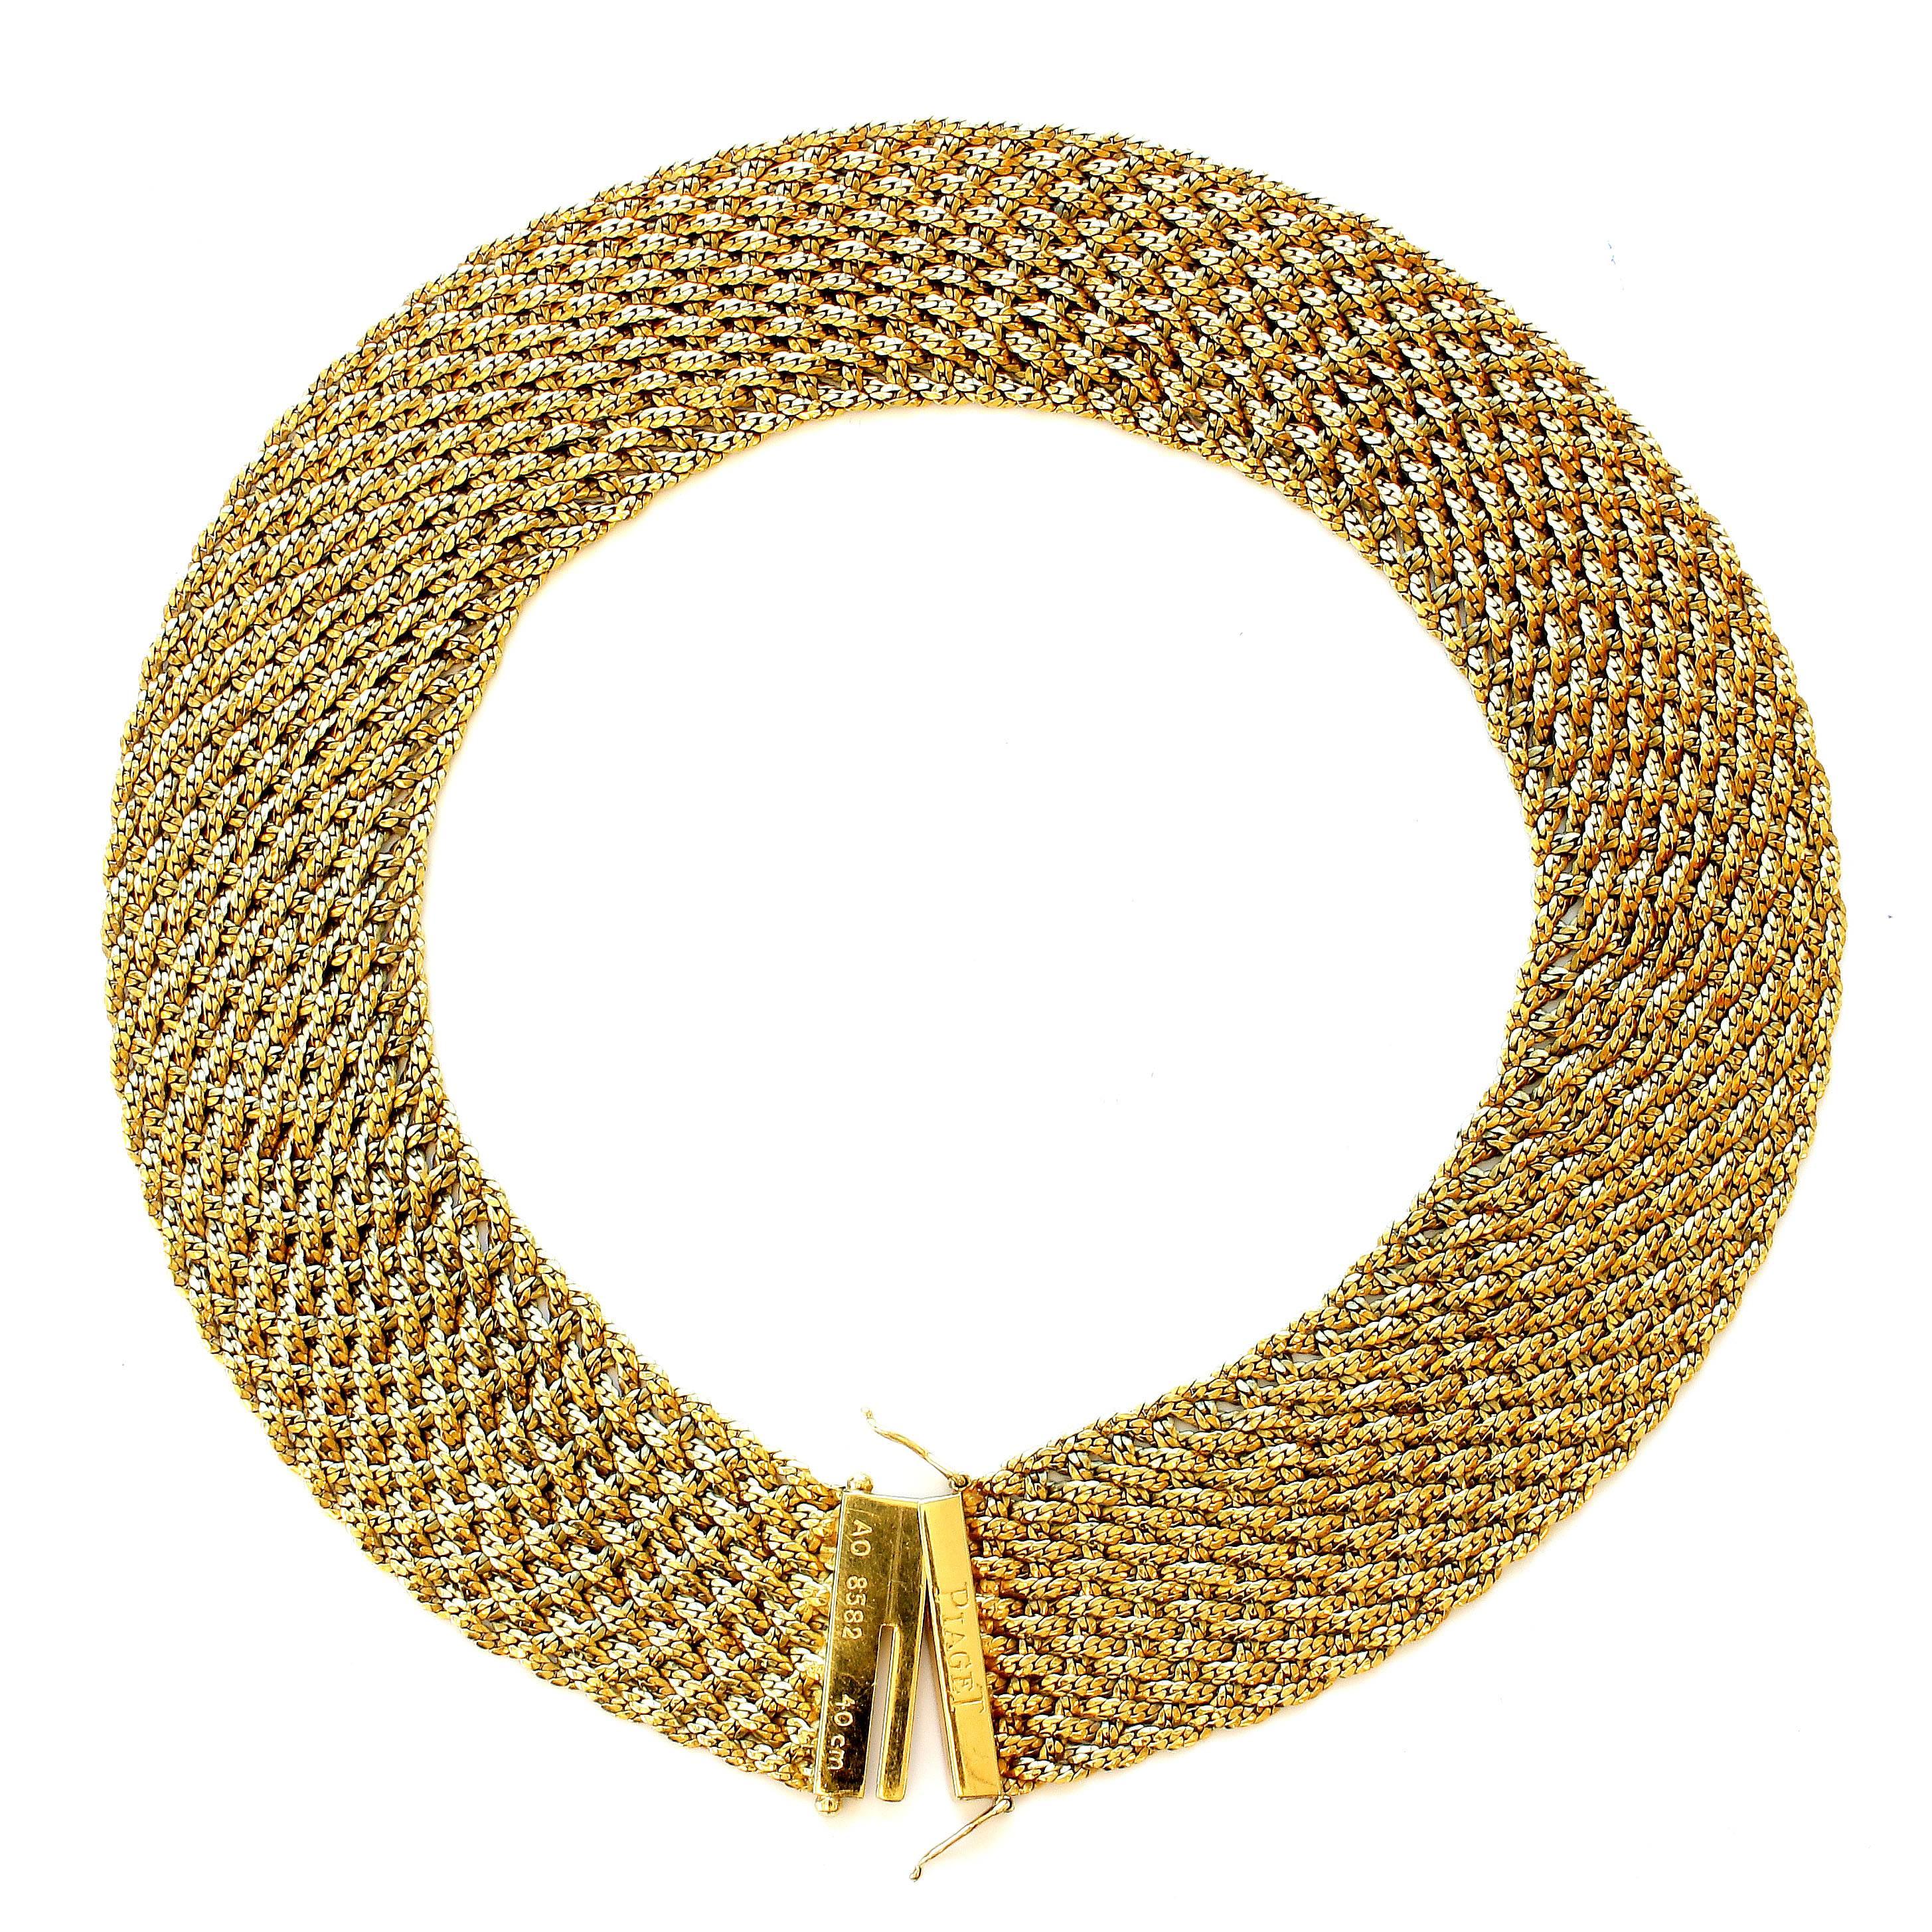 Created by Piaget this gold necklace is smooth as silk and just as flexible. Superior gold threading has developed a necklace that moves like a scarf being blown in the air. Fashioned in multihued 18k gold. Signed Piaget and stamped with French